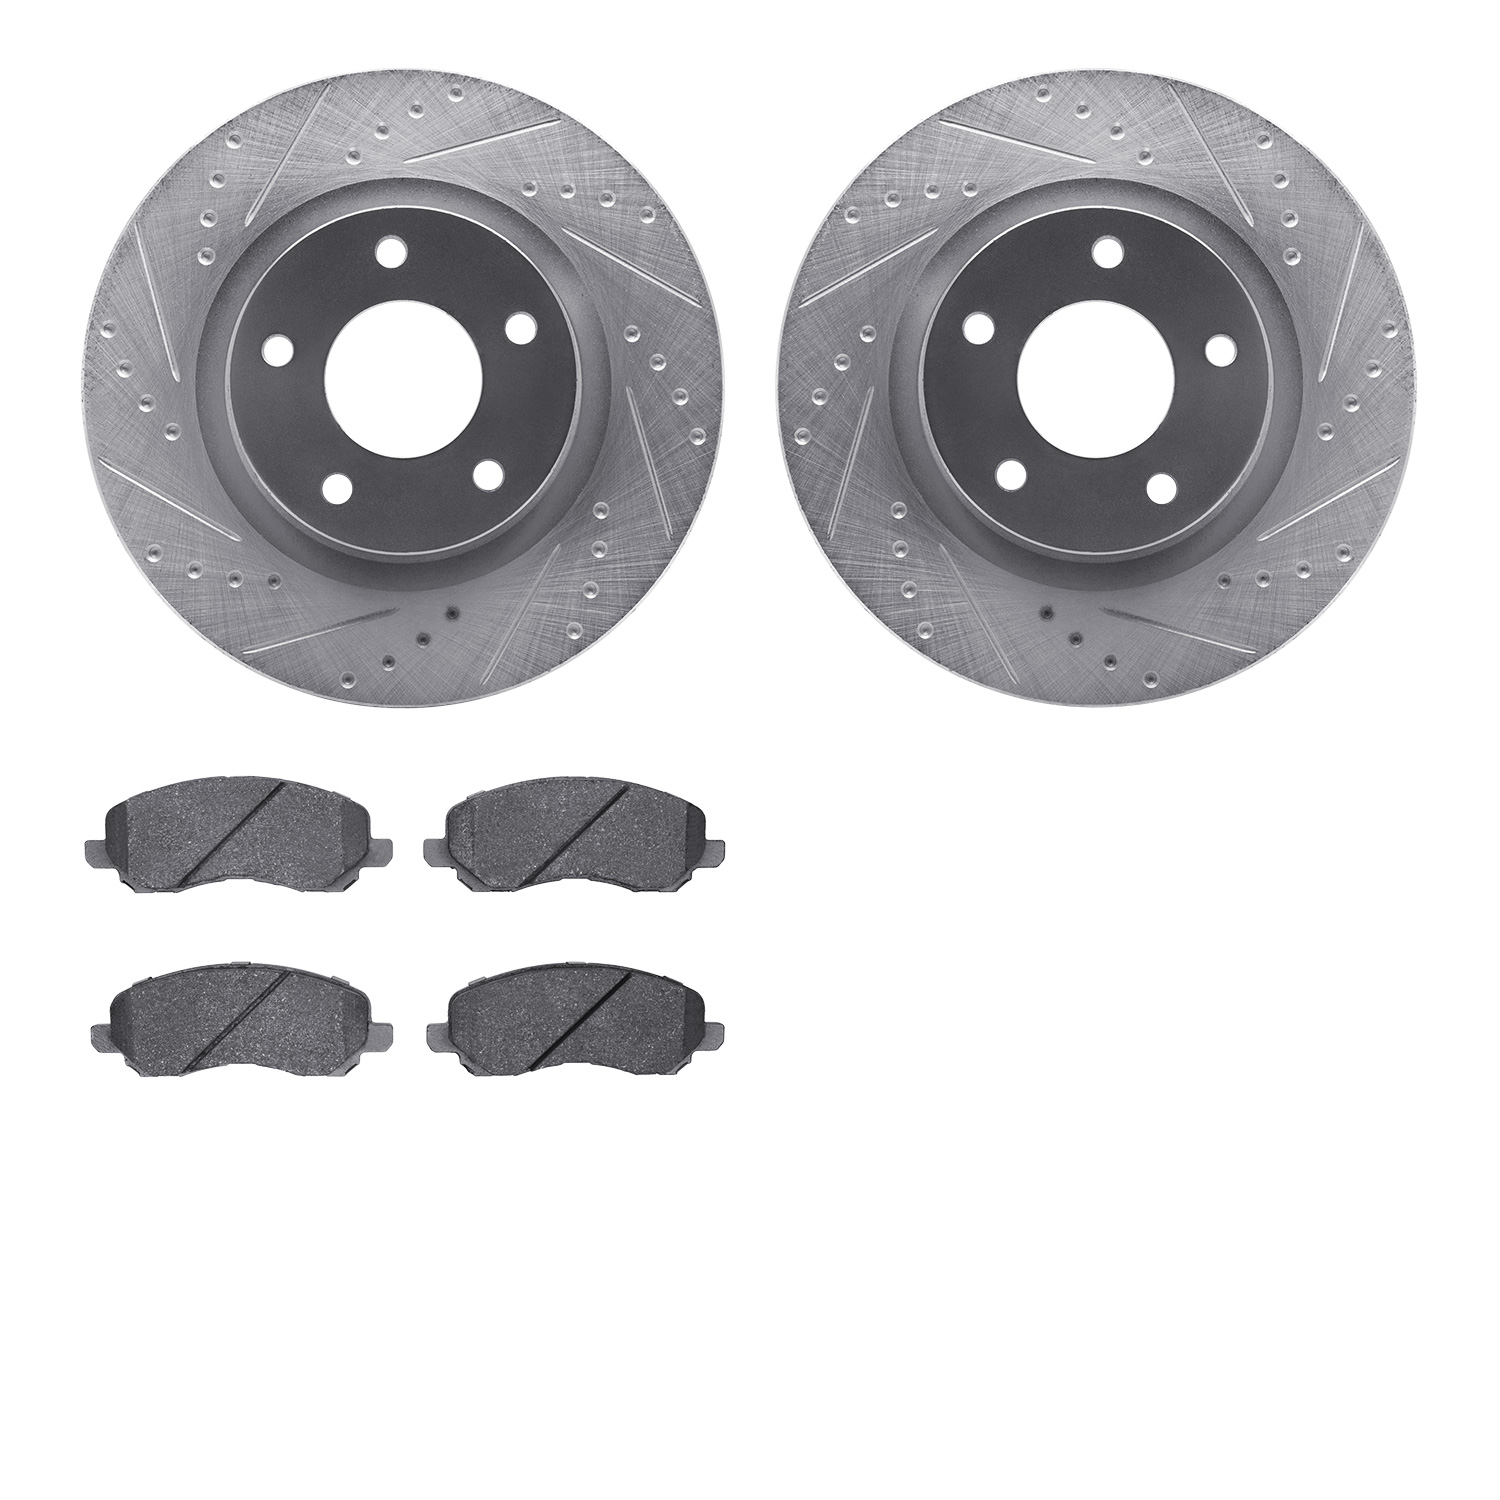 7302-39026 Drilled/Slotted Brake Rotor with 3000-Series Ceramic Brake Pads Kit [Silver], Fits Select Multiple Makes/Models, Posi